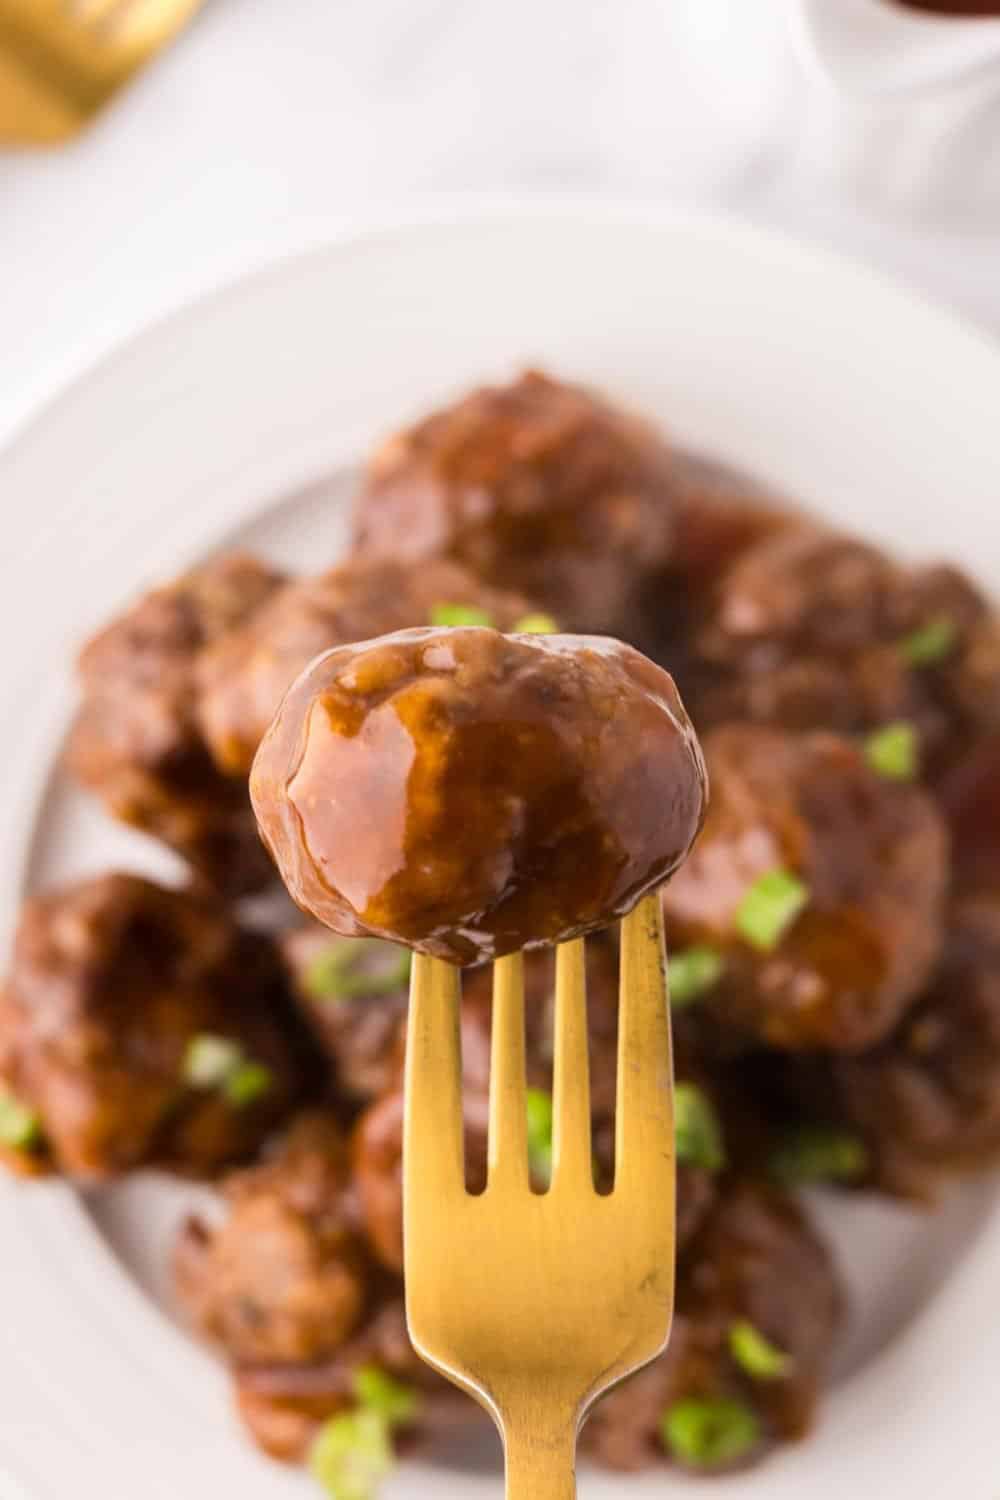 Golden fork stabbed into one sweet and sour meatball over a stack on a round white plate.